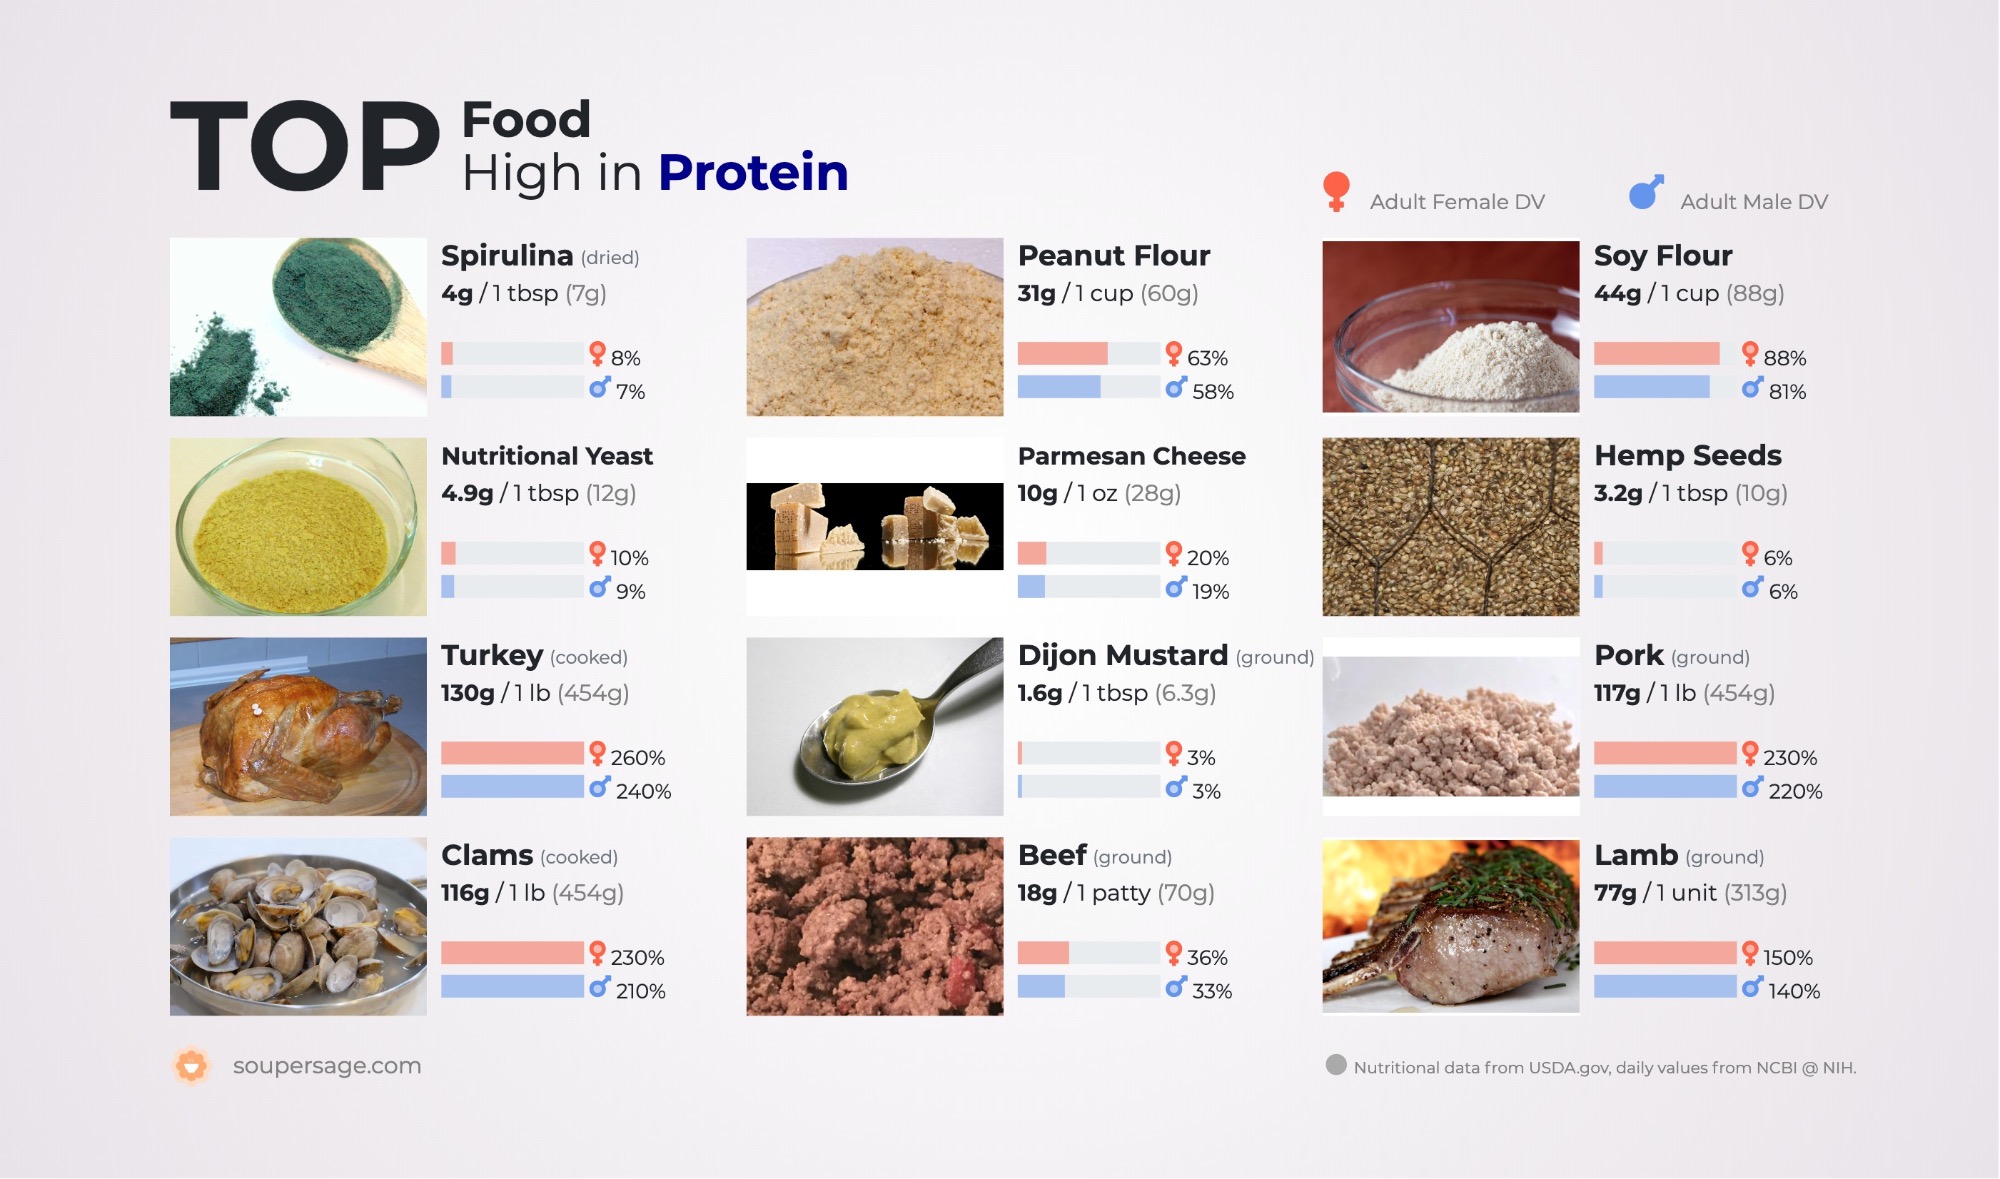 image of Top Food High in Protein